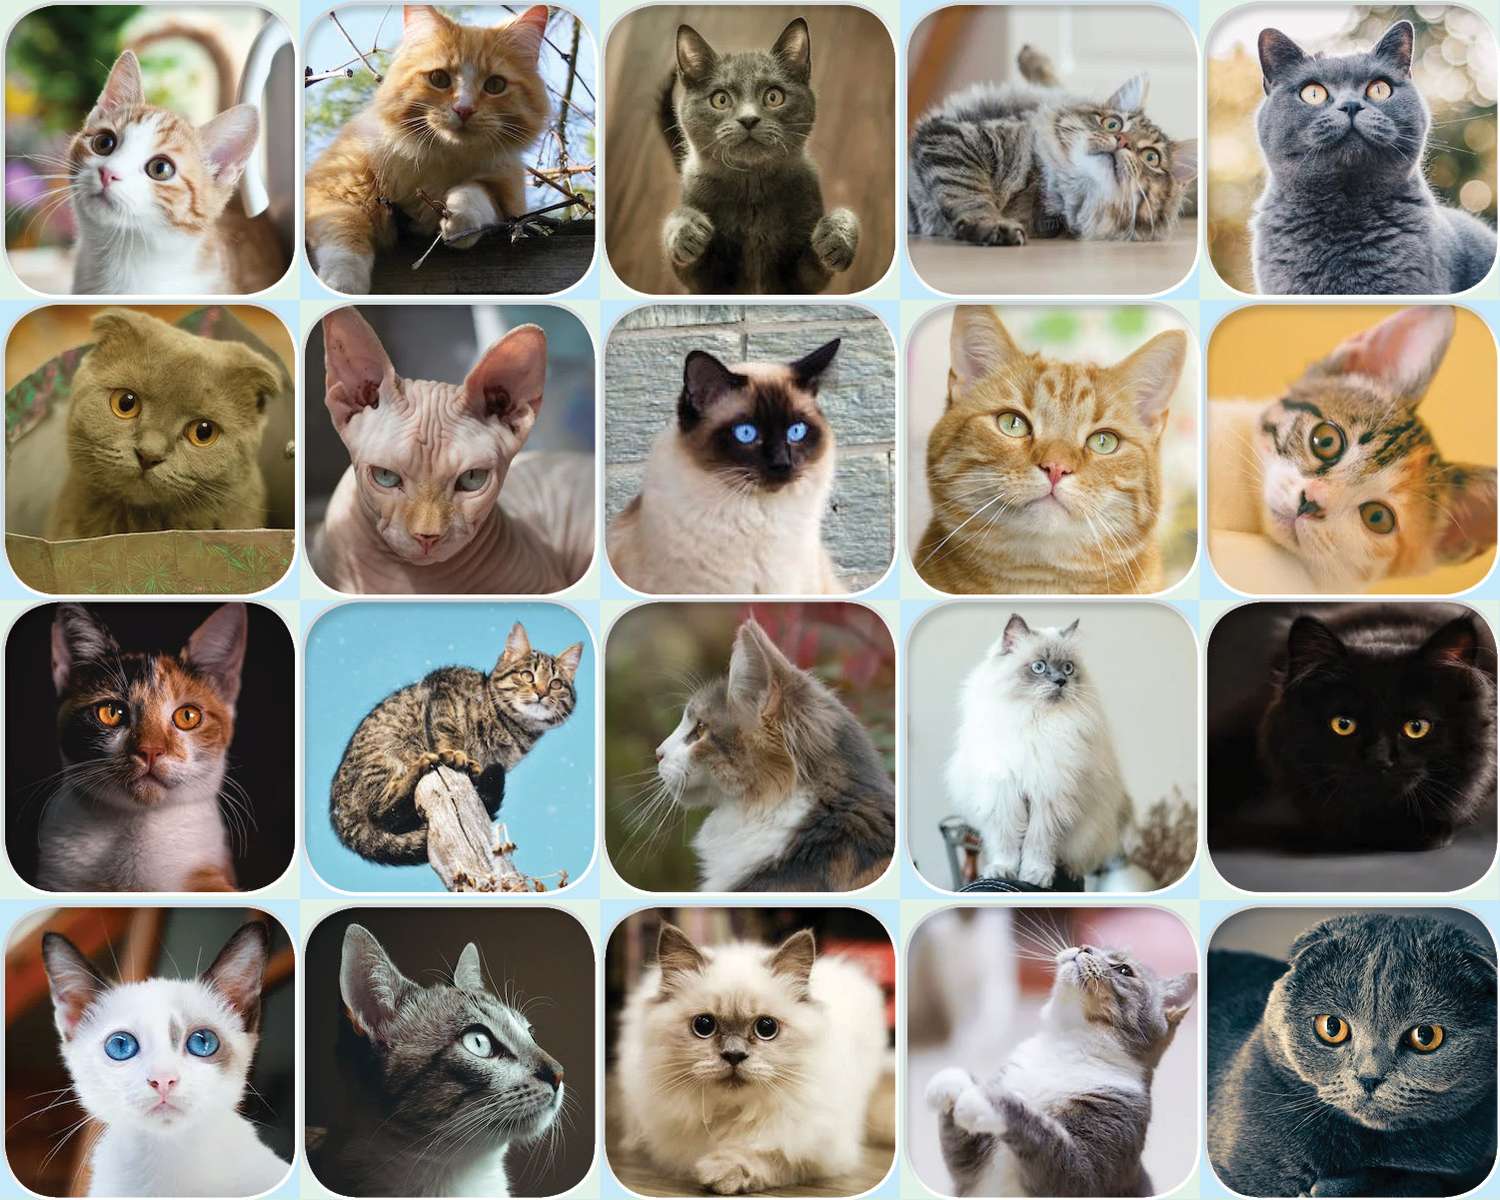 cats and kittens online puzzle